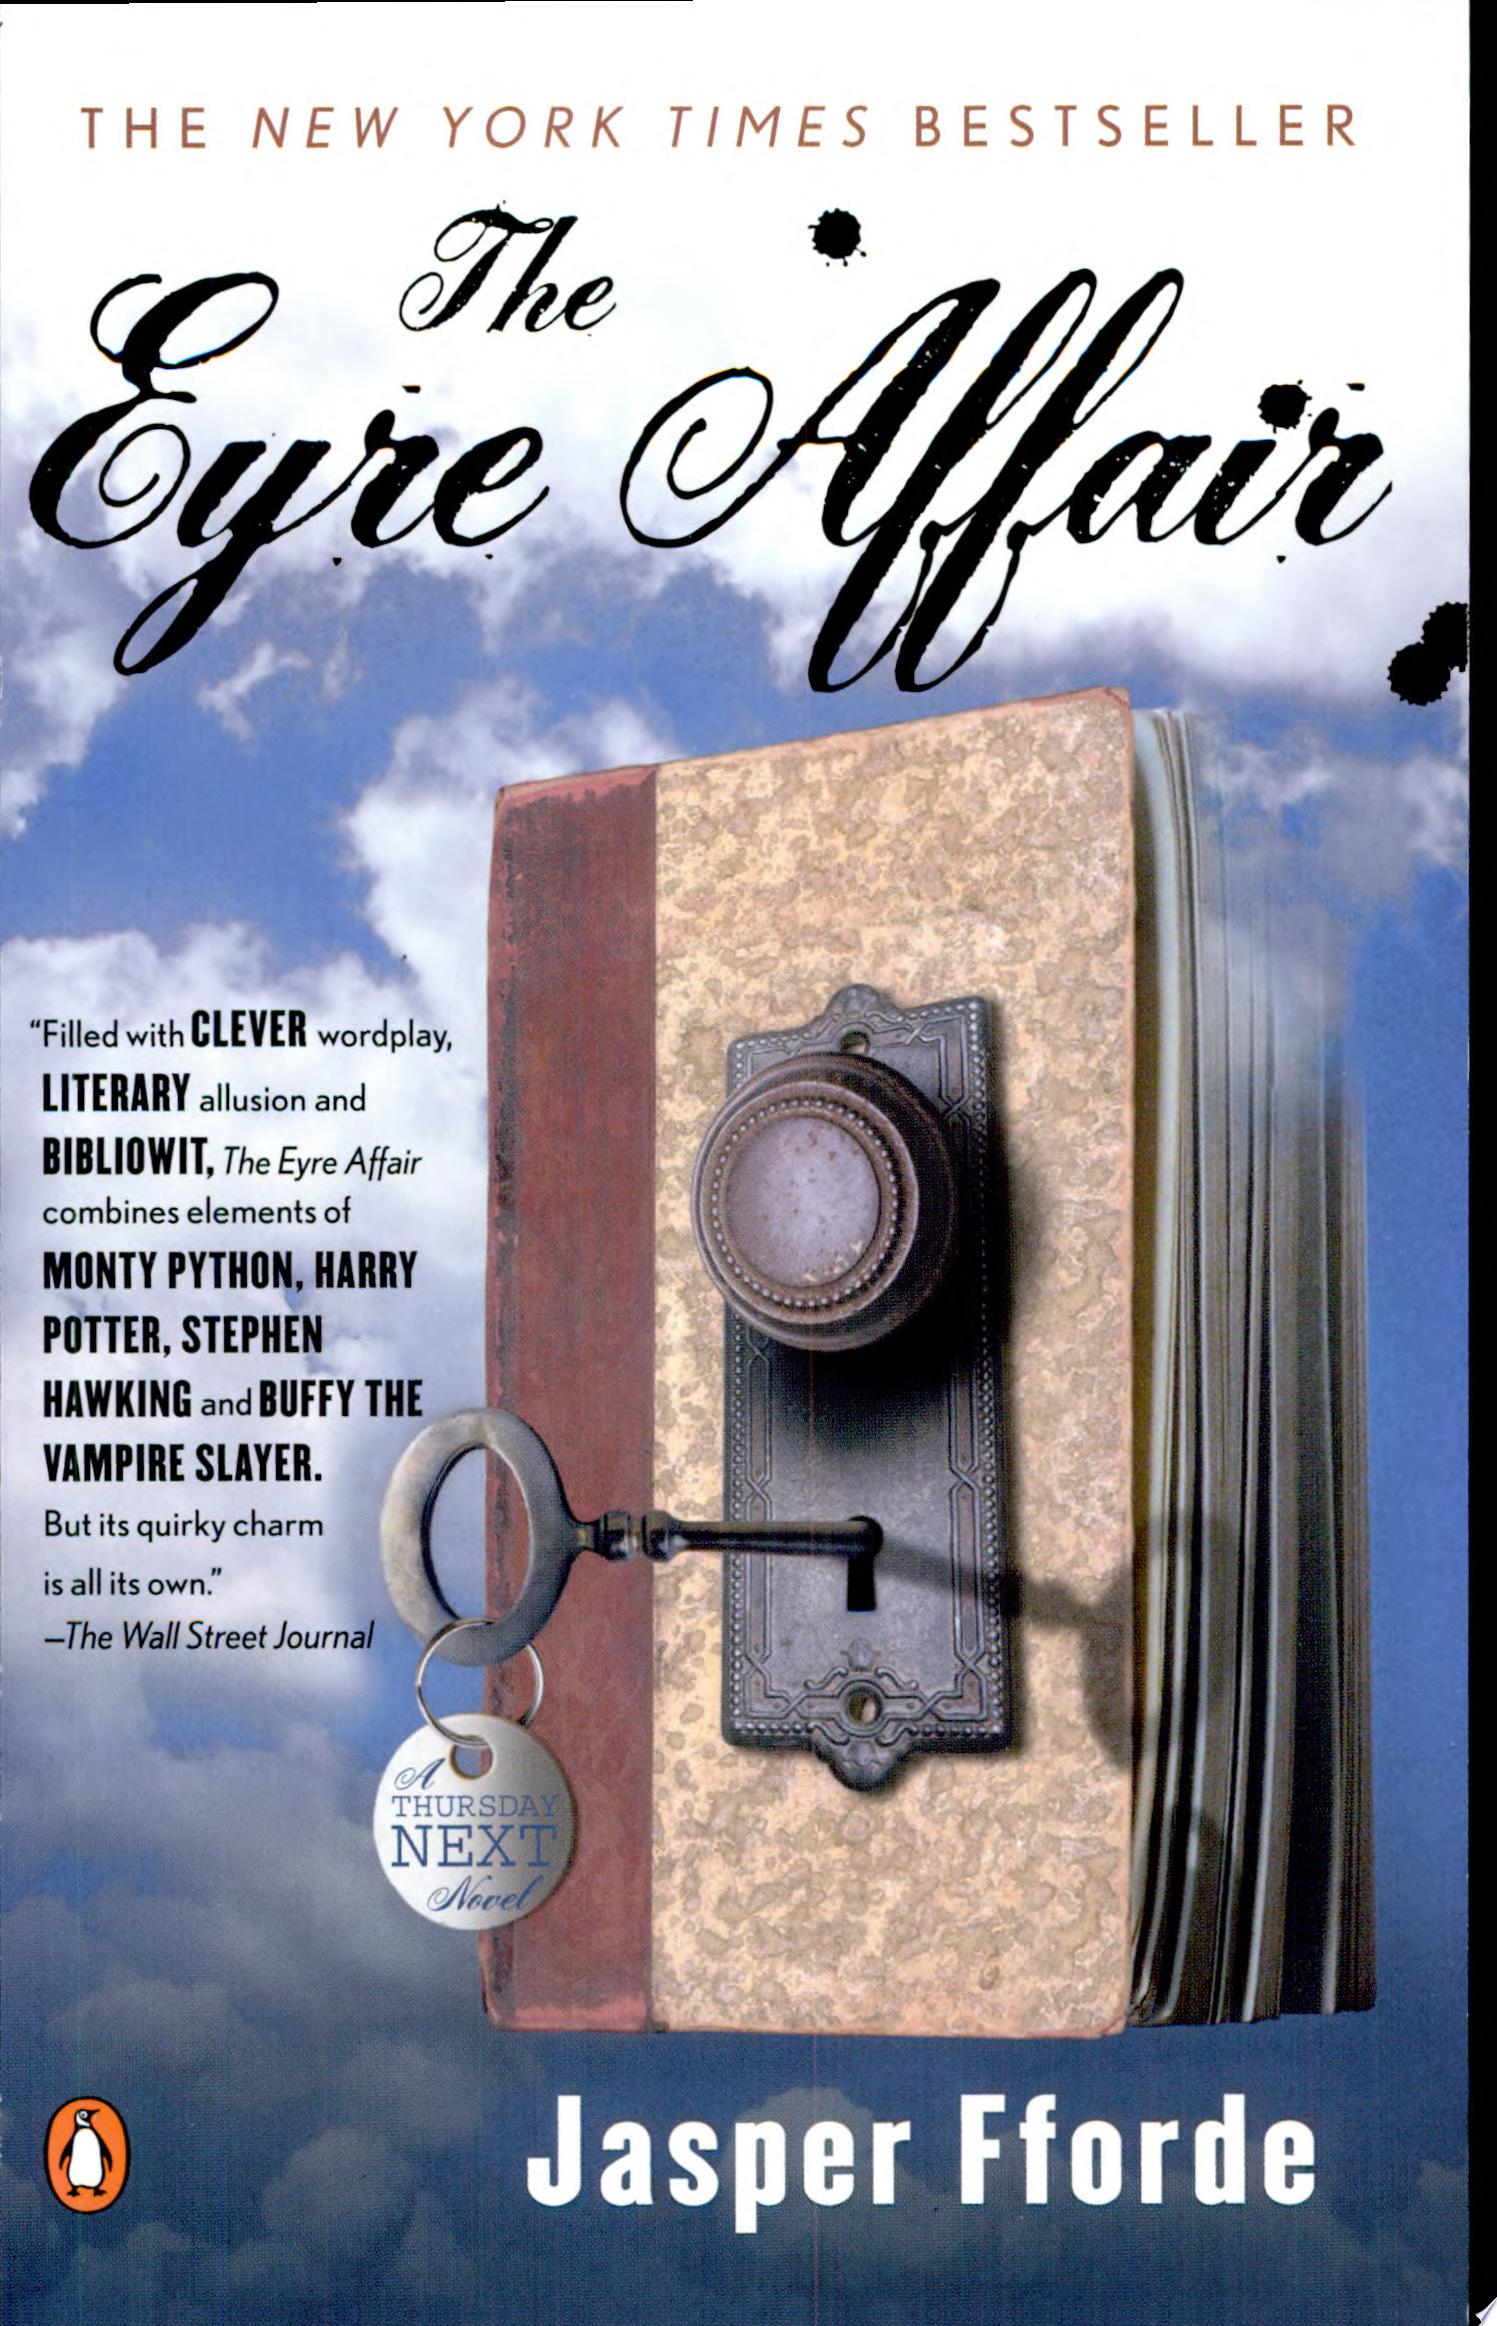 Image for "The Eyre Affair"